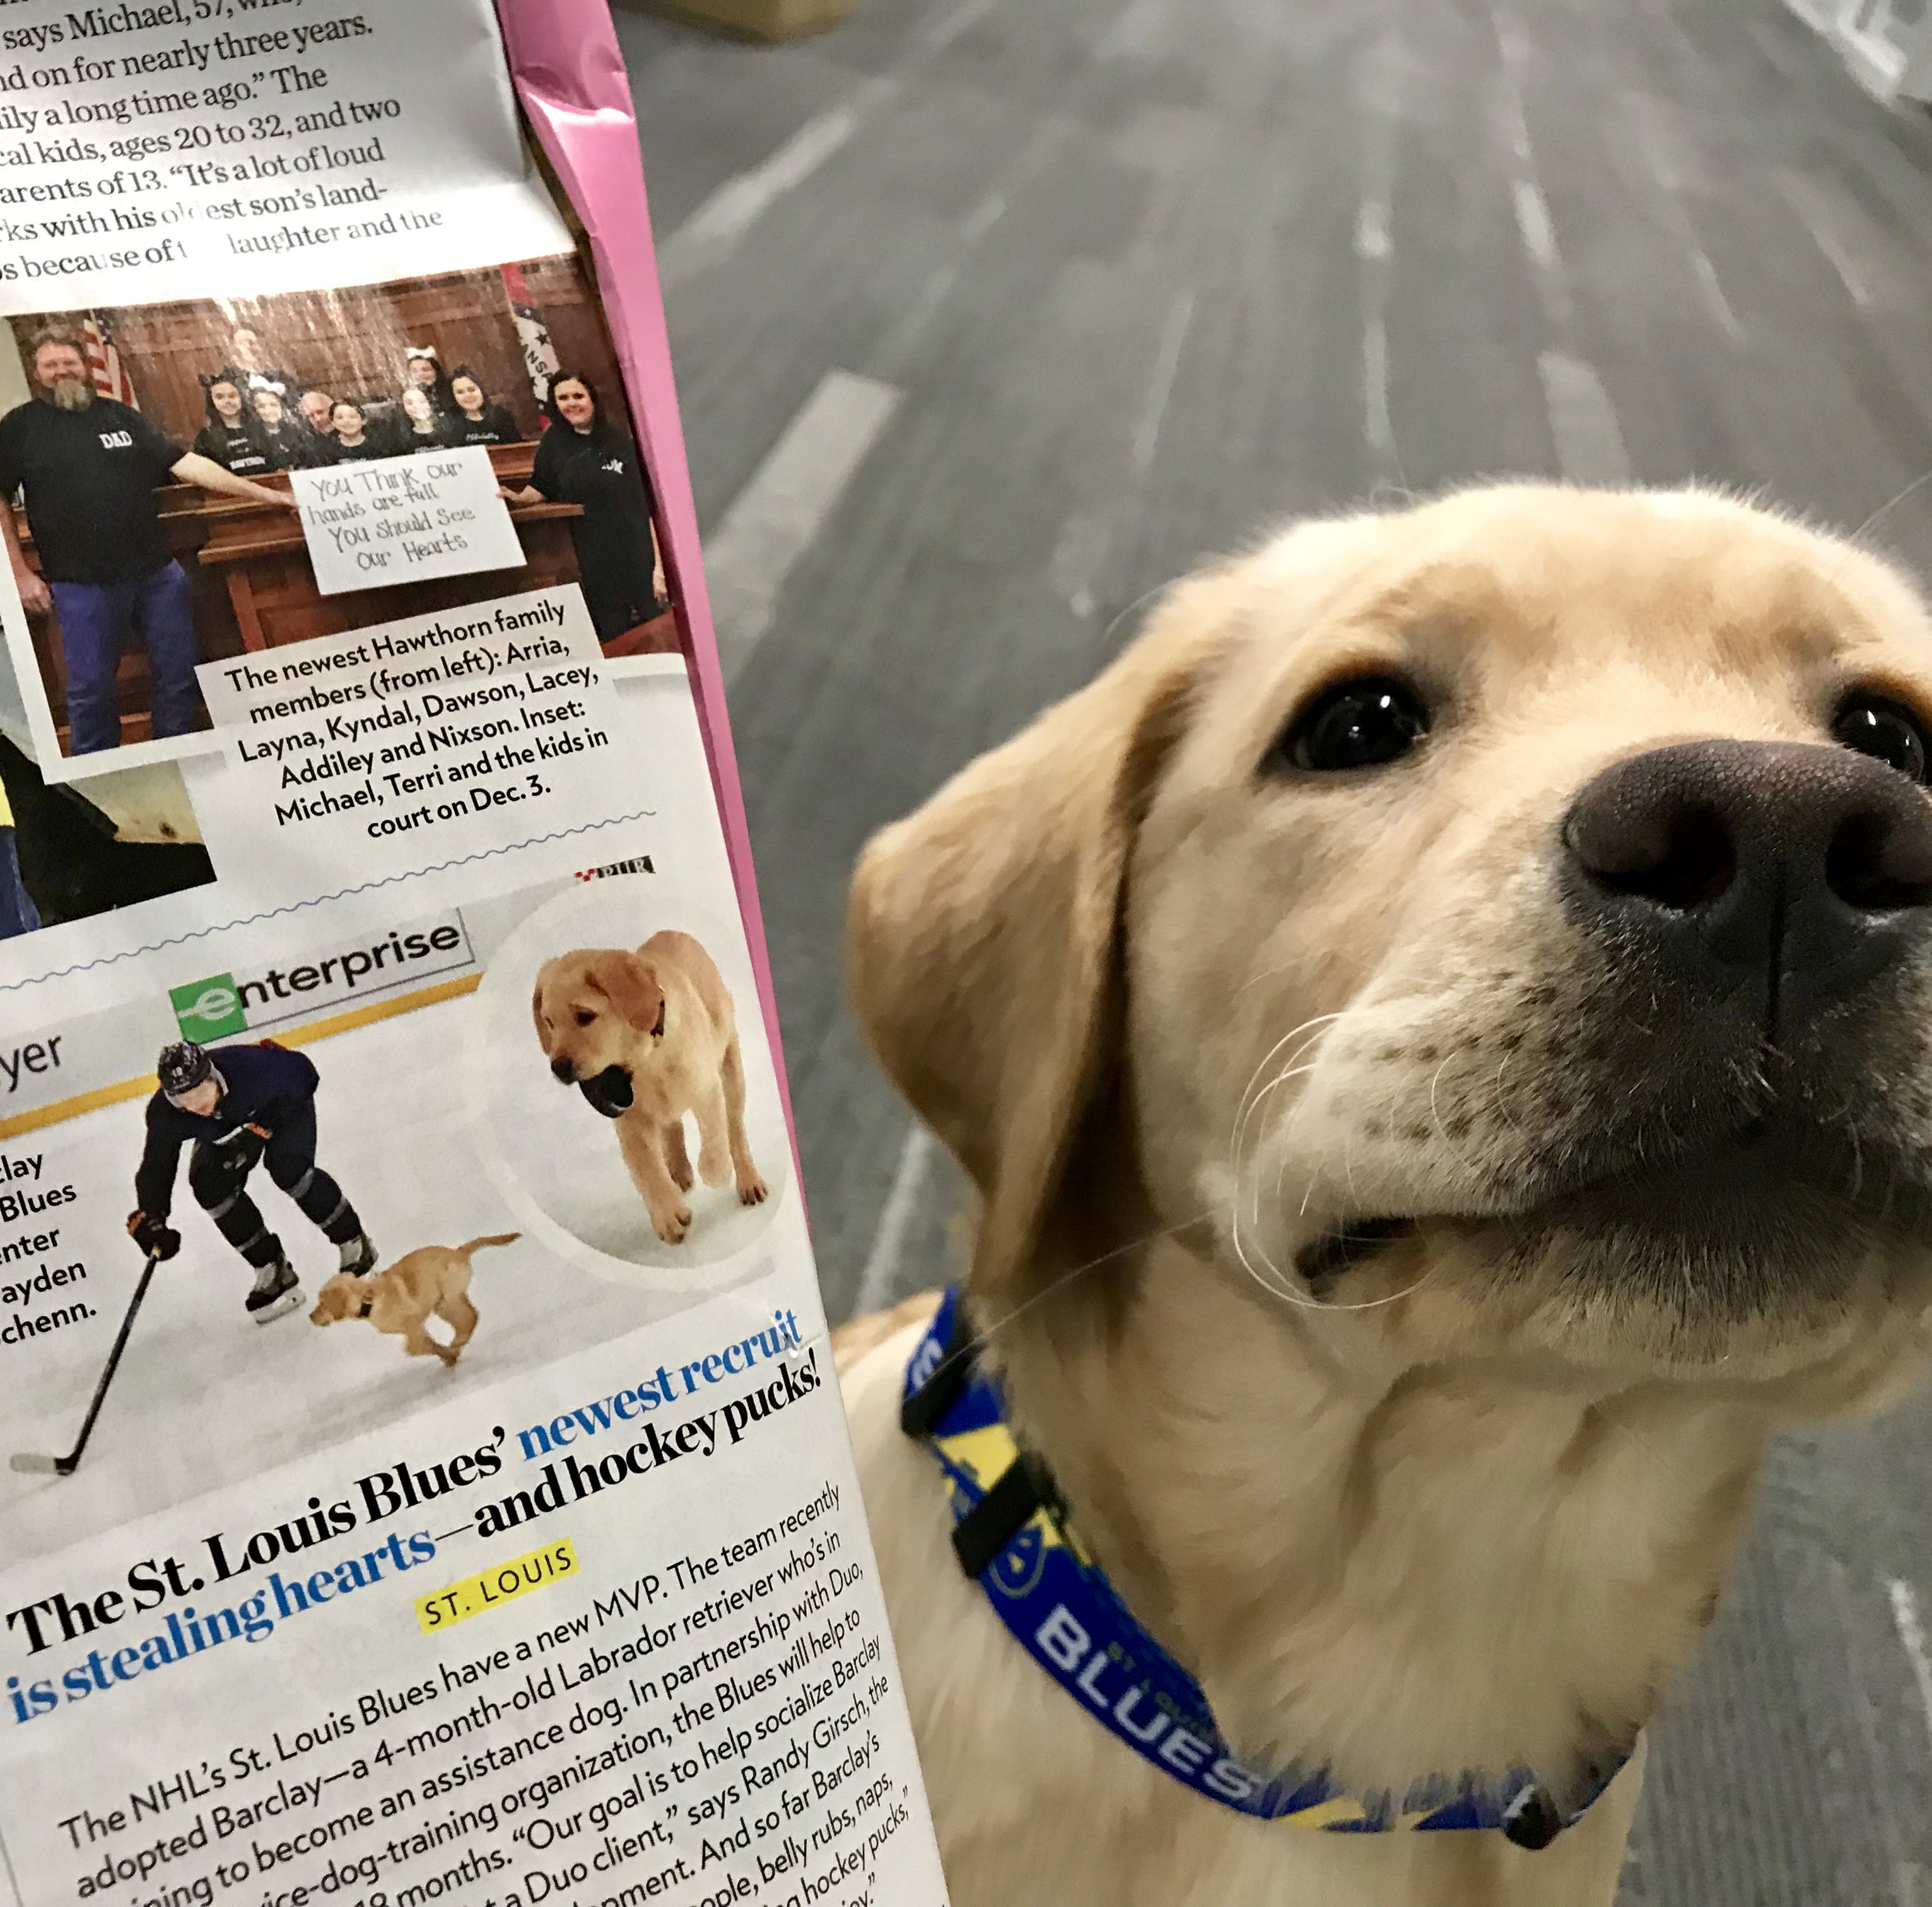 St. Louis Blues on X: Barclay's in @people magazine and now the